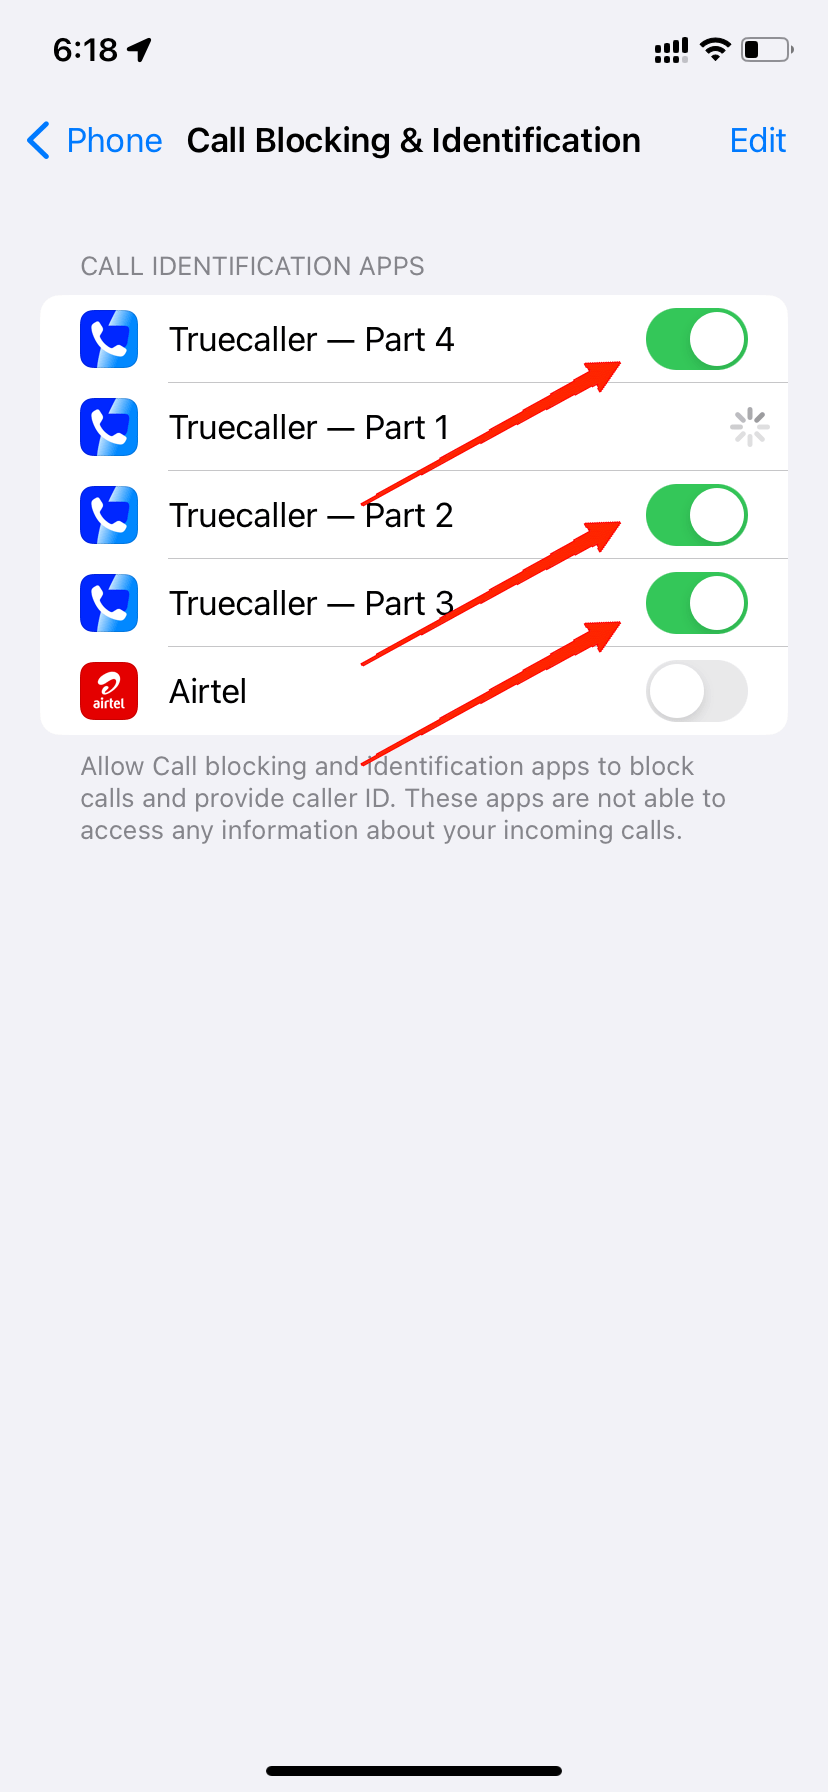 Here make sure you enable all Truecaller parts for seamless caller ID identification.